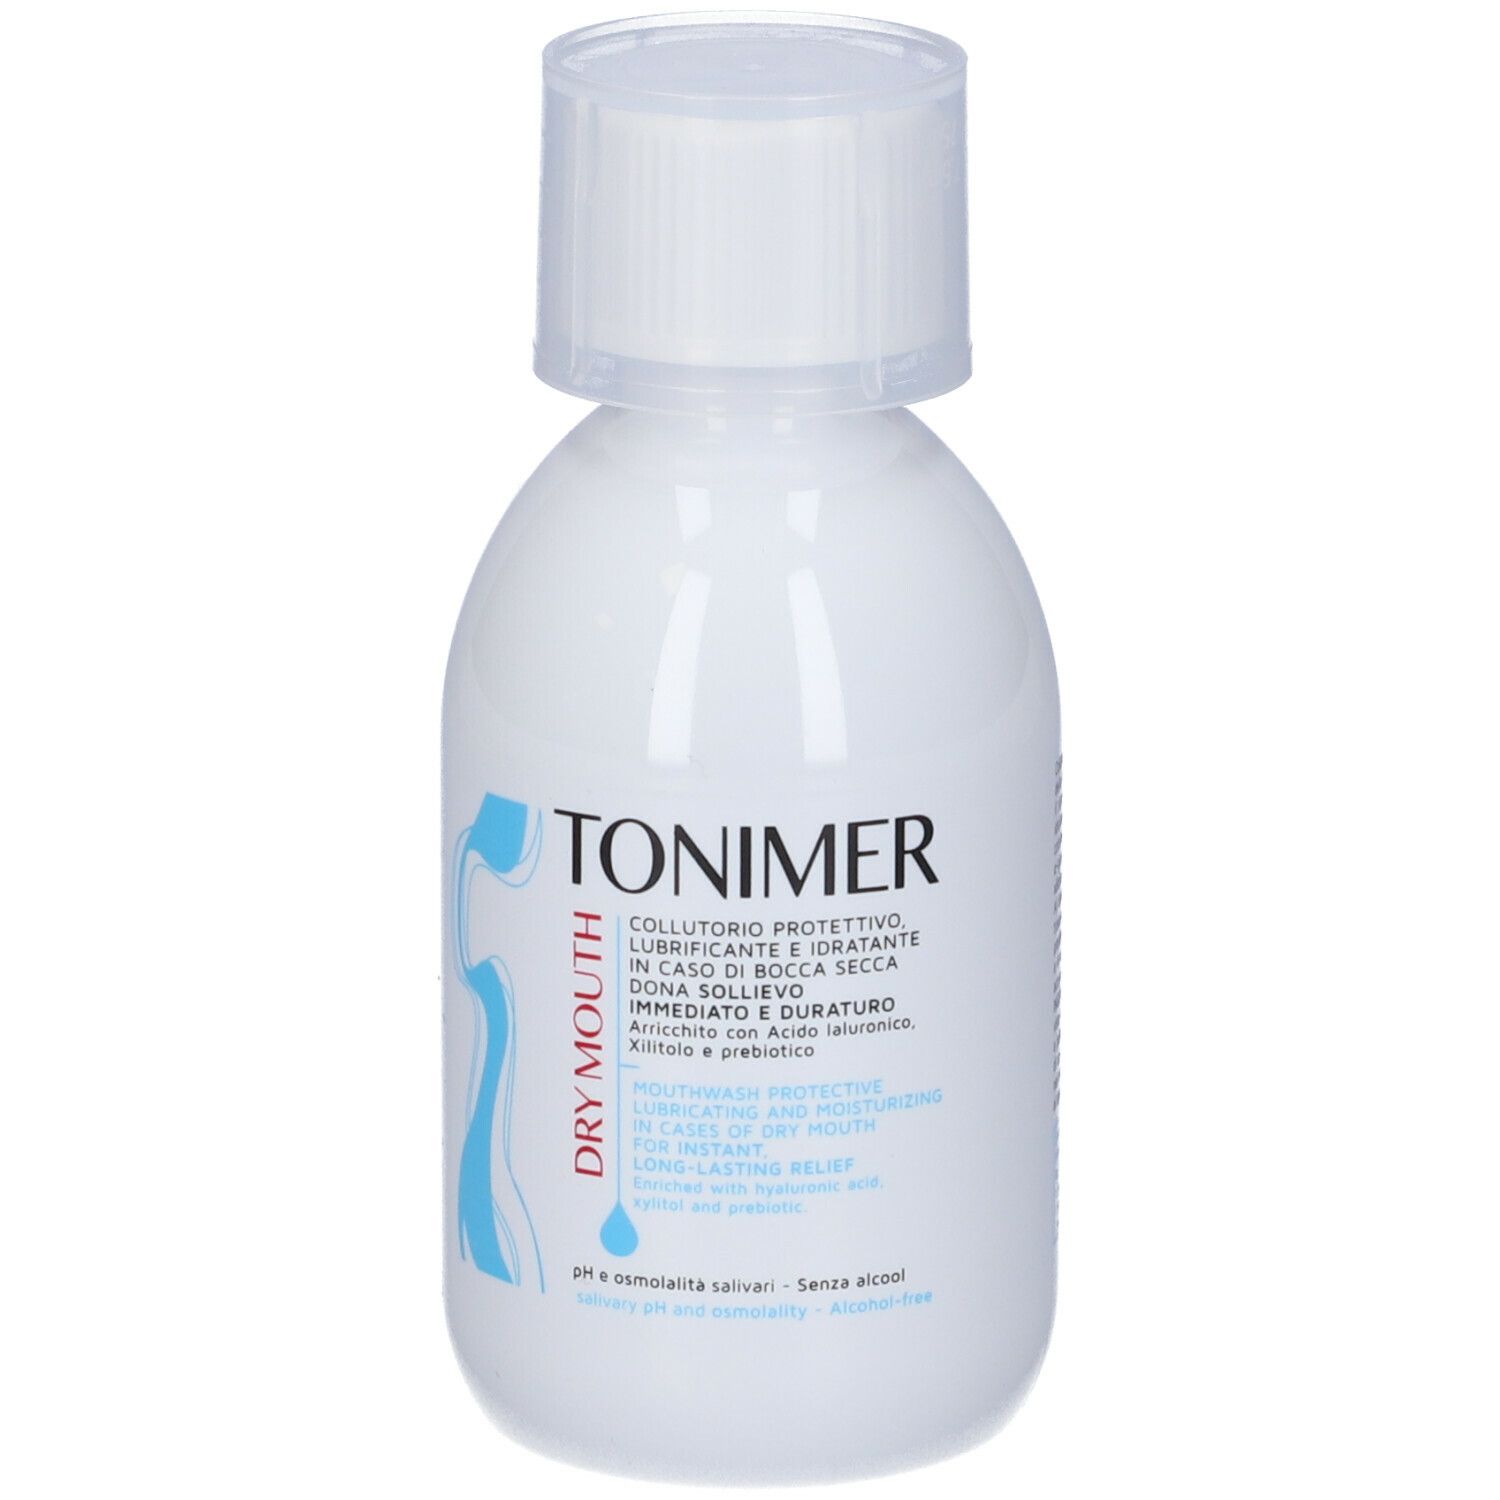 Image of Dry Mouth Colluttorio Tonimer 200ml